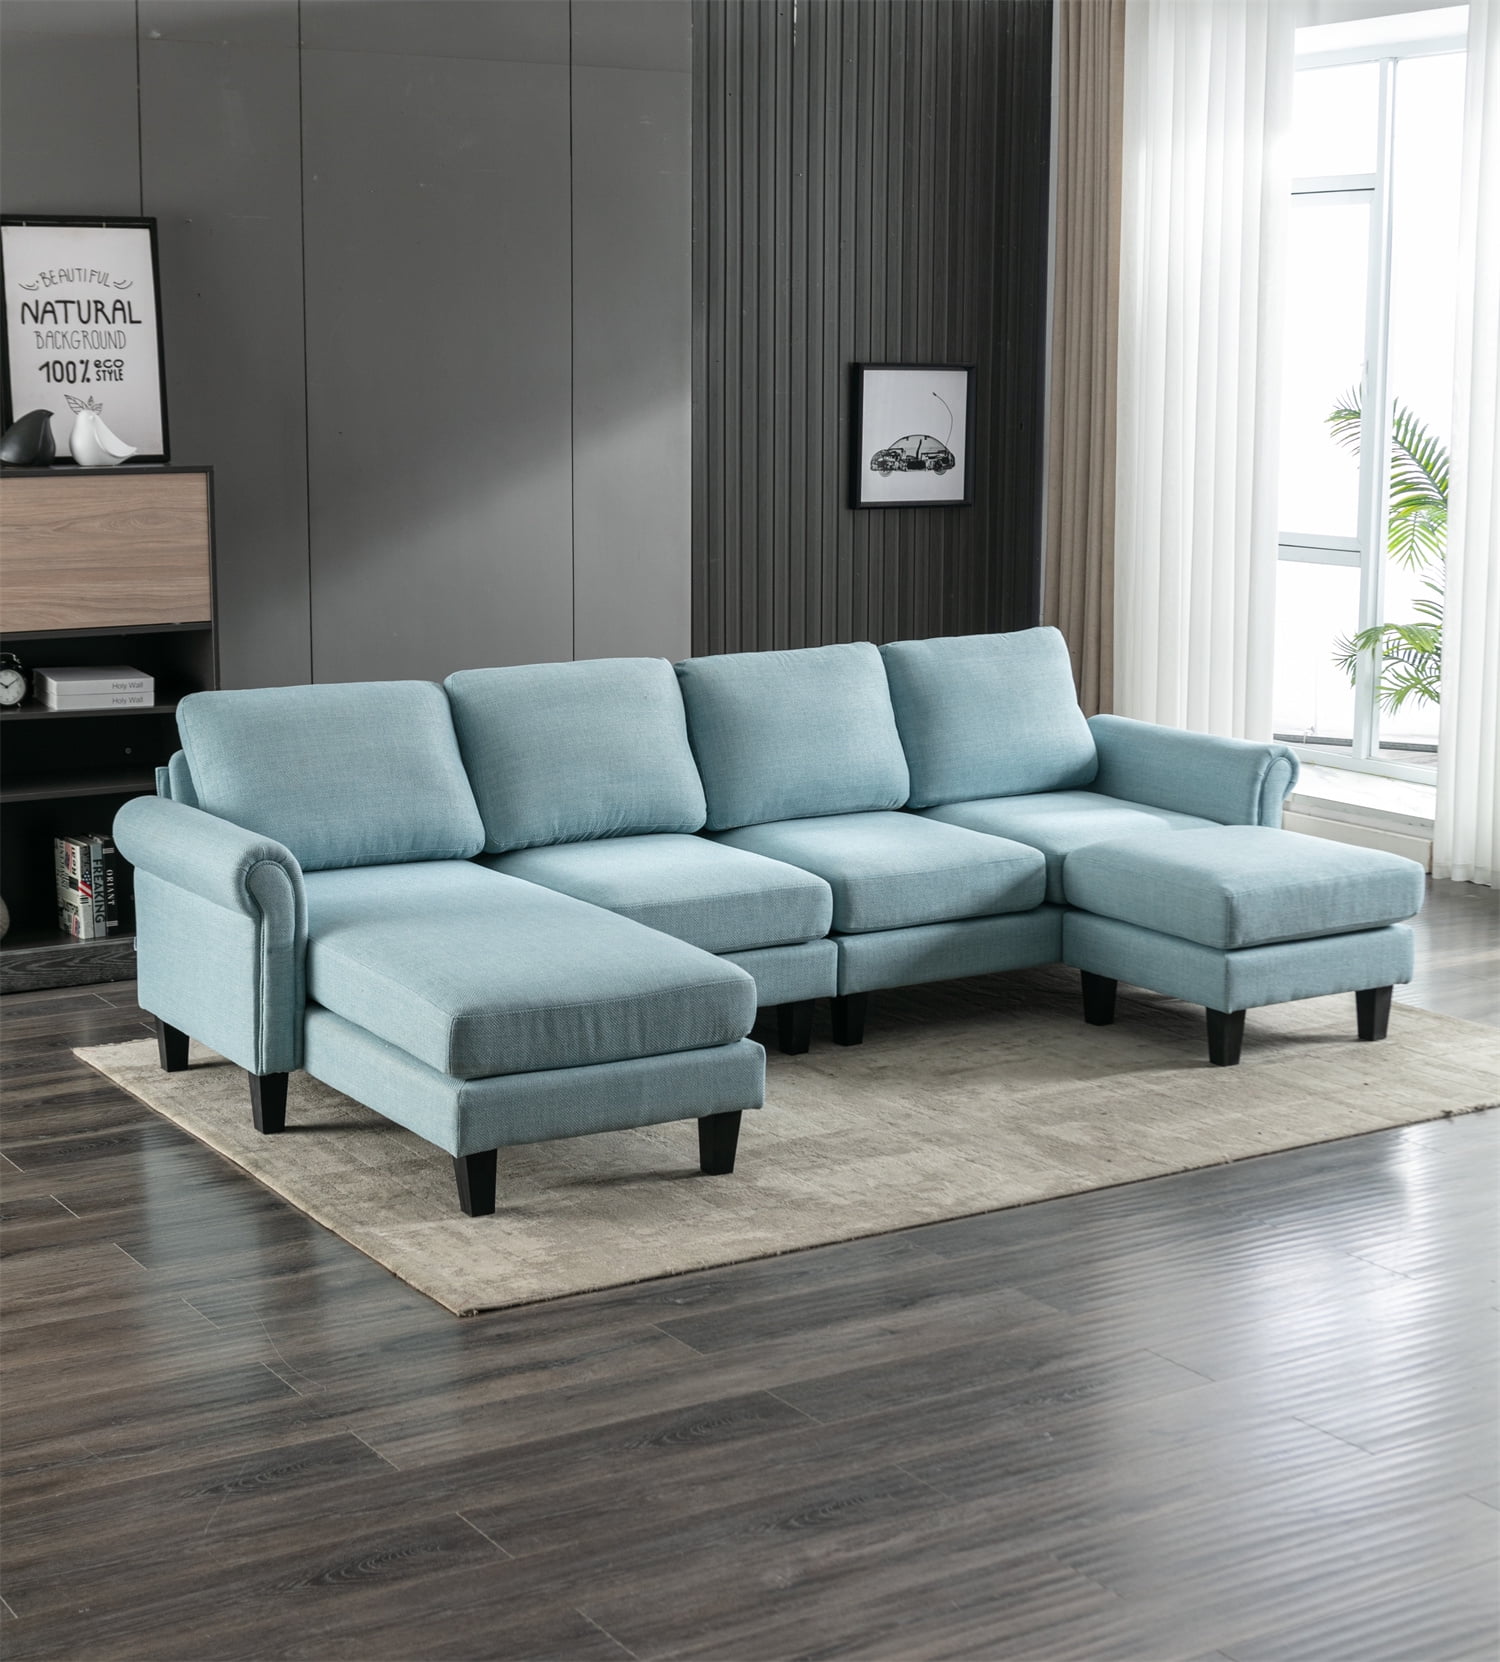 Es Transplant storm Convertible Sectional Sofa Set, 108 Inch U-Shaped Sectional Sofa Couch with  Chaise and Removable Ottoman Modern Velvet Upholstered Modular Sofa with 2  Pillows Accent Sofa for Living Room, Light Blue - Walmart.com